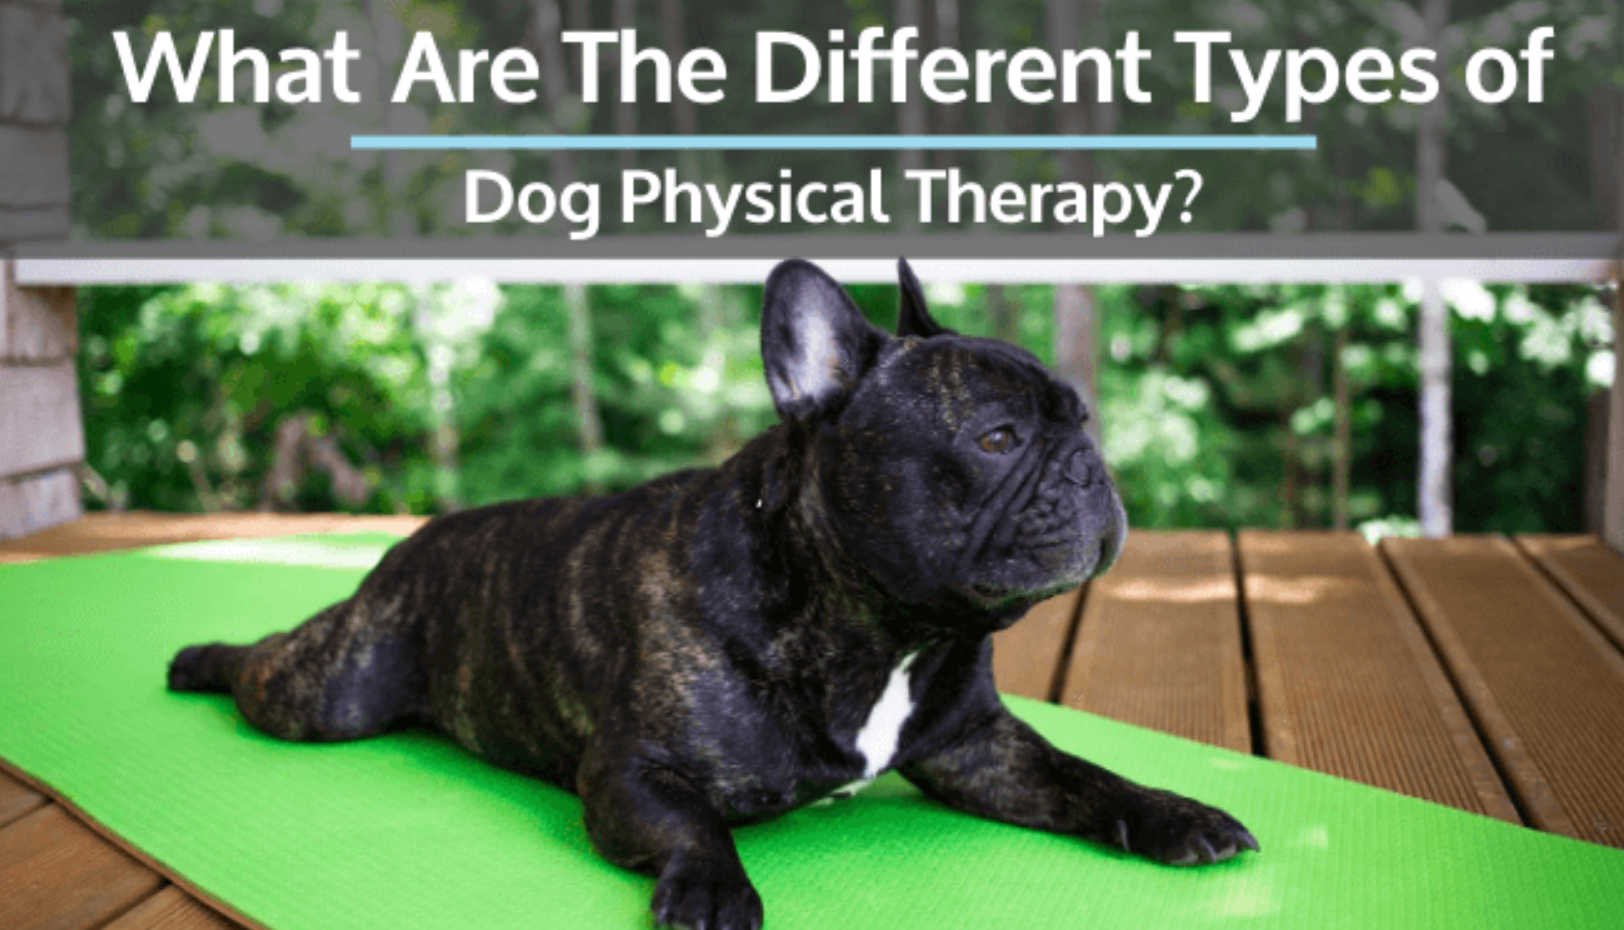 What Are the Different Types of Dog Physical Therapy?